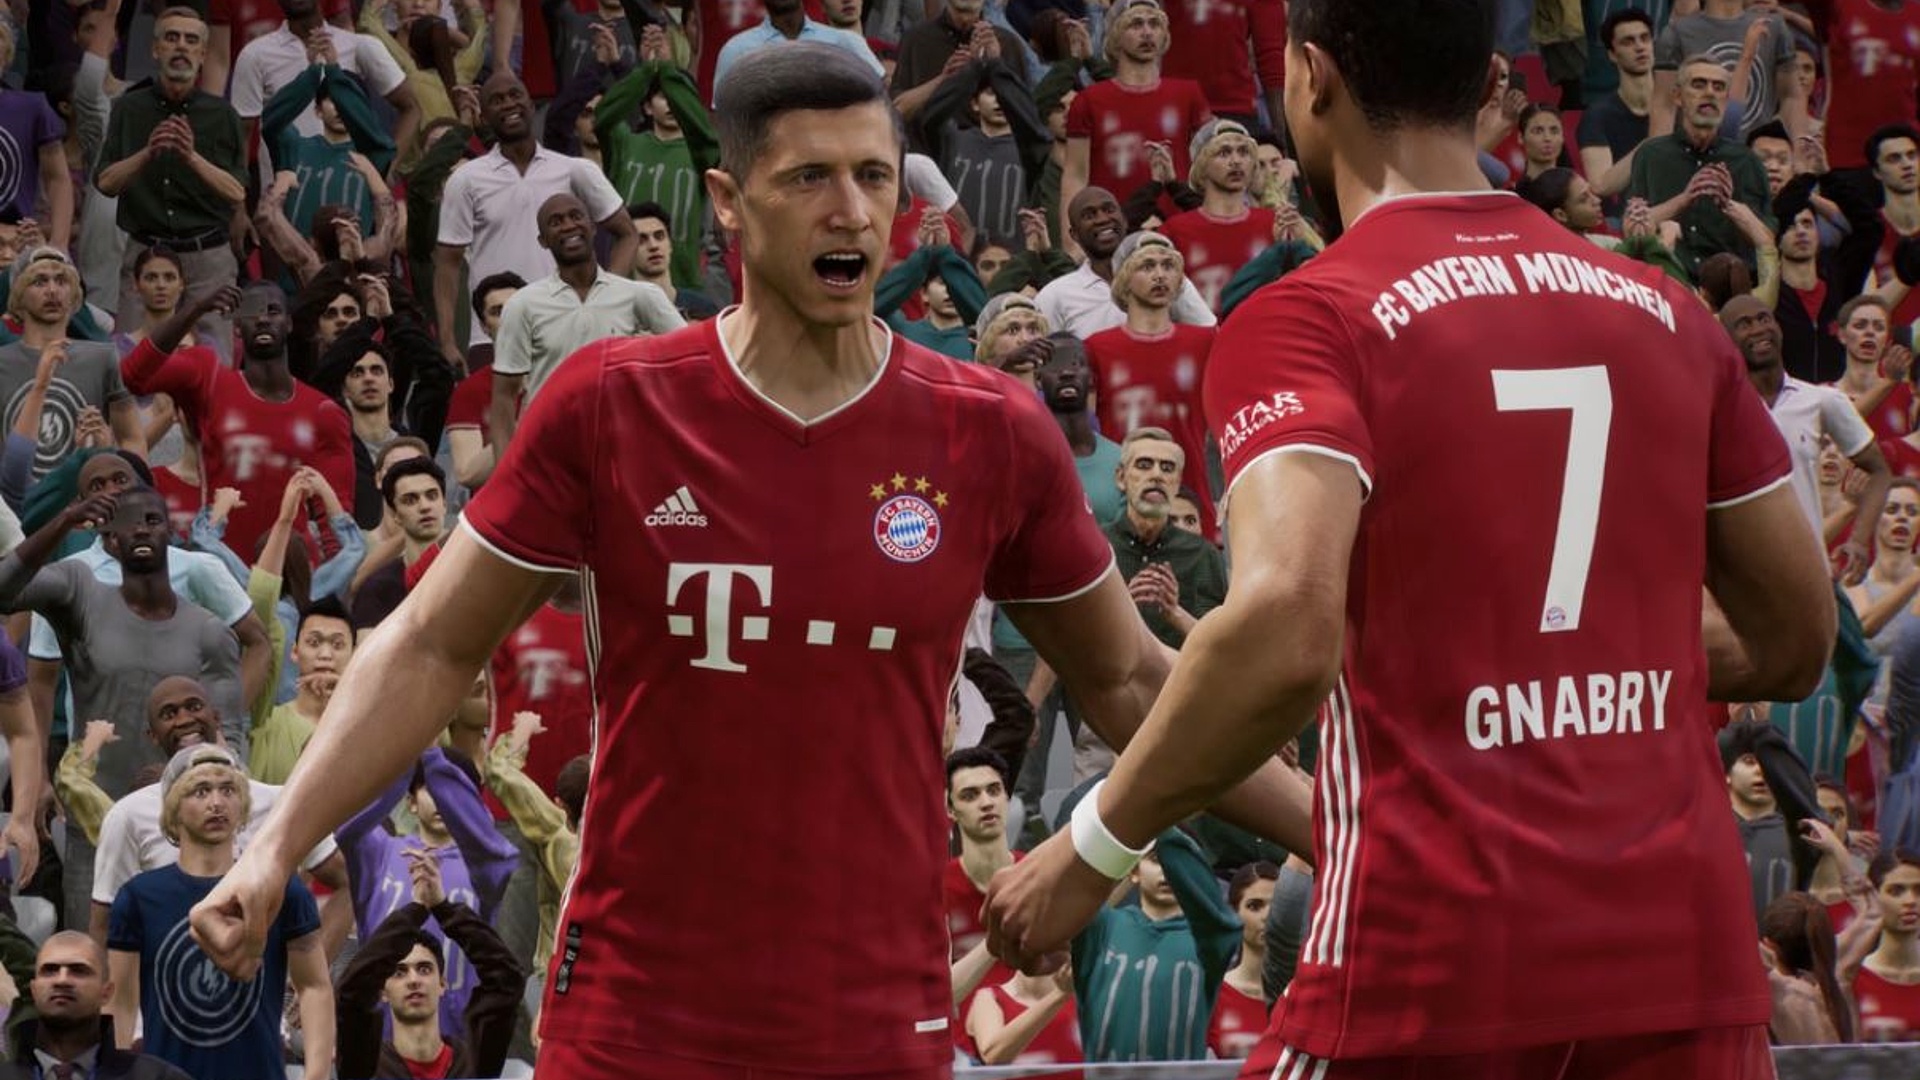 PES Is Now eFootball, Free-to-Play With Crossplay Support on PC, Mobile,  Consoles